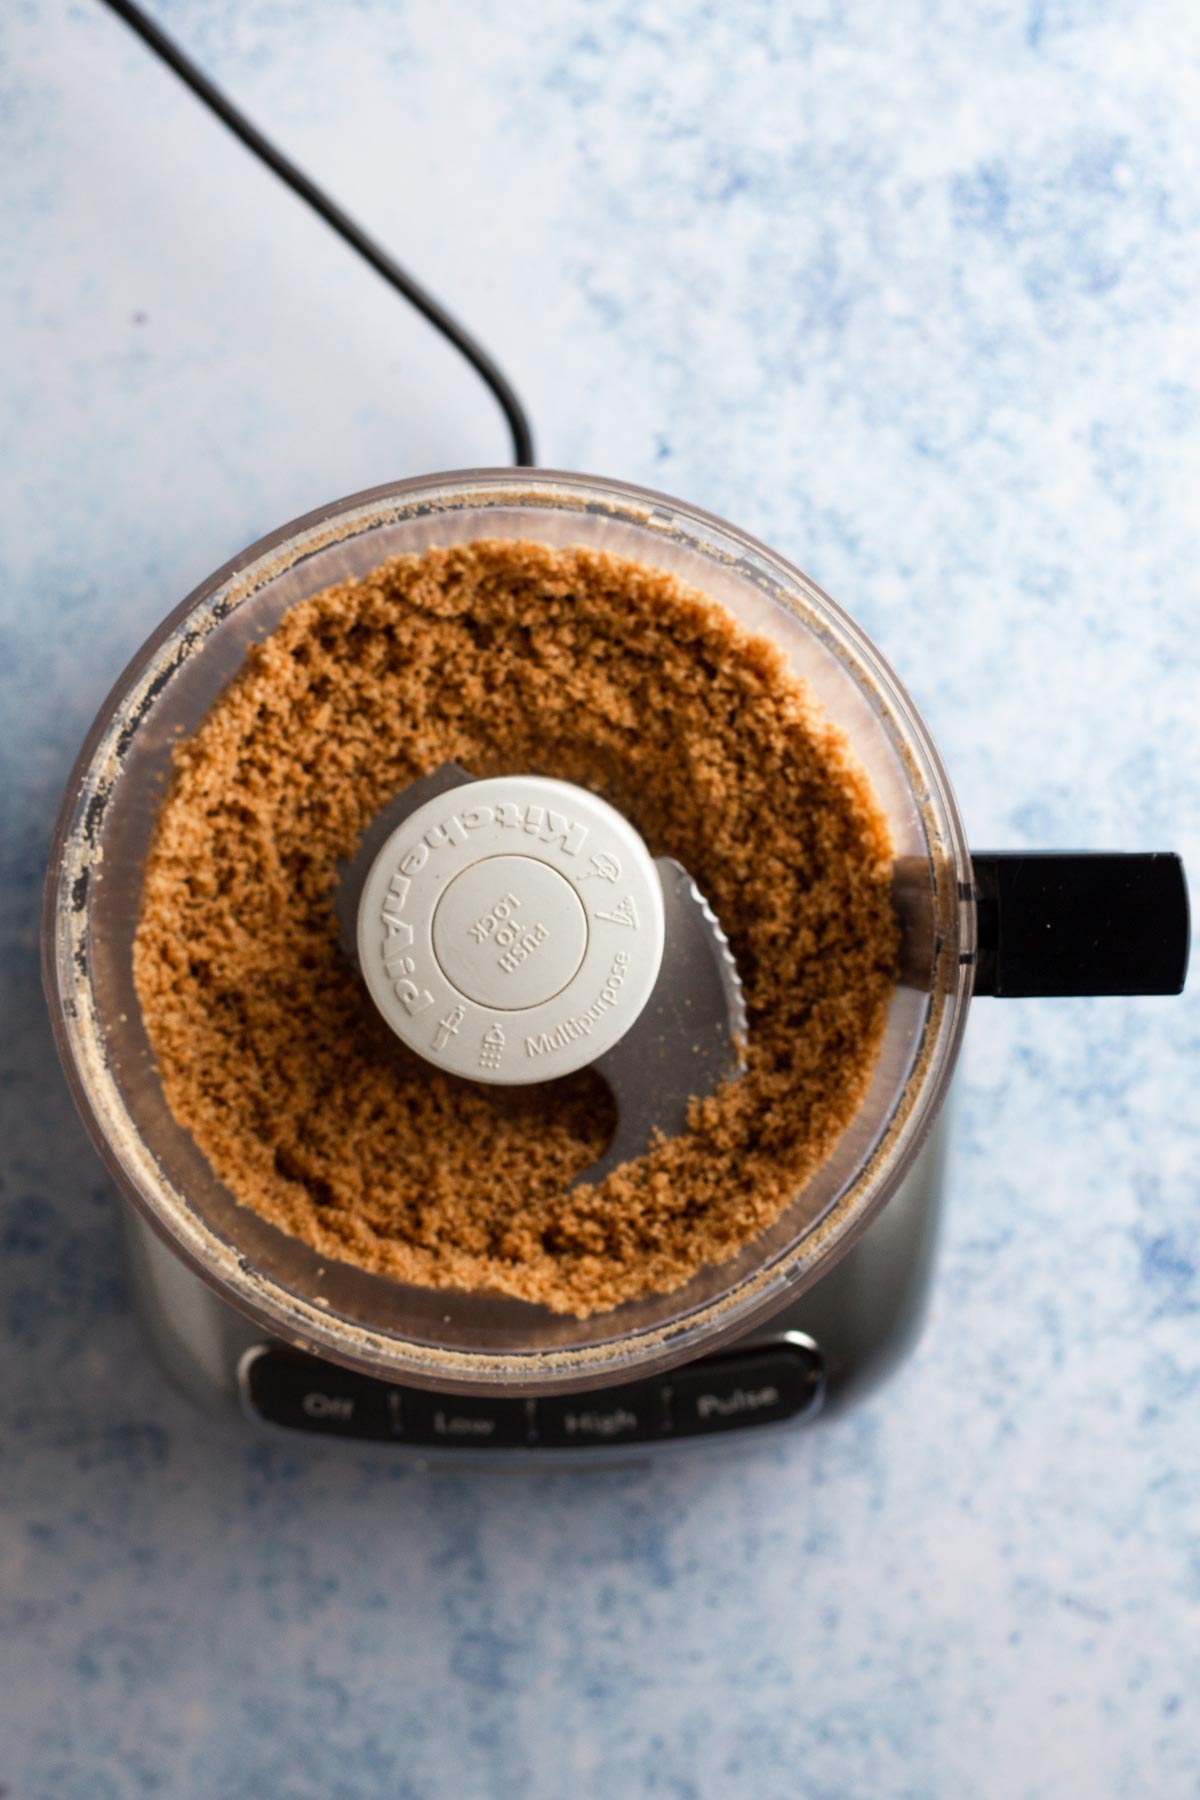 Graham cracker crust in the bowl of a food processor.